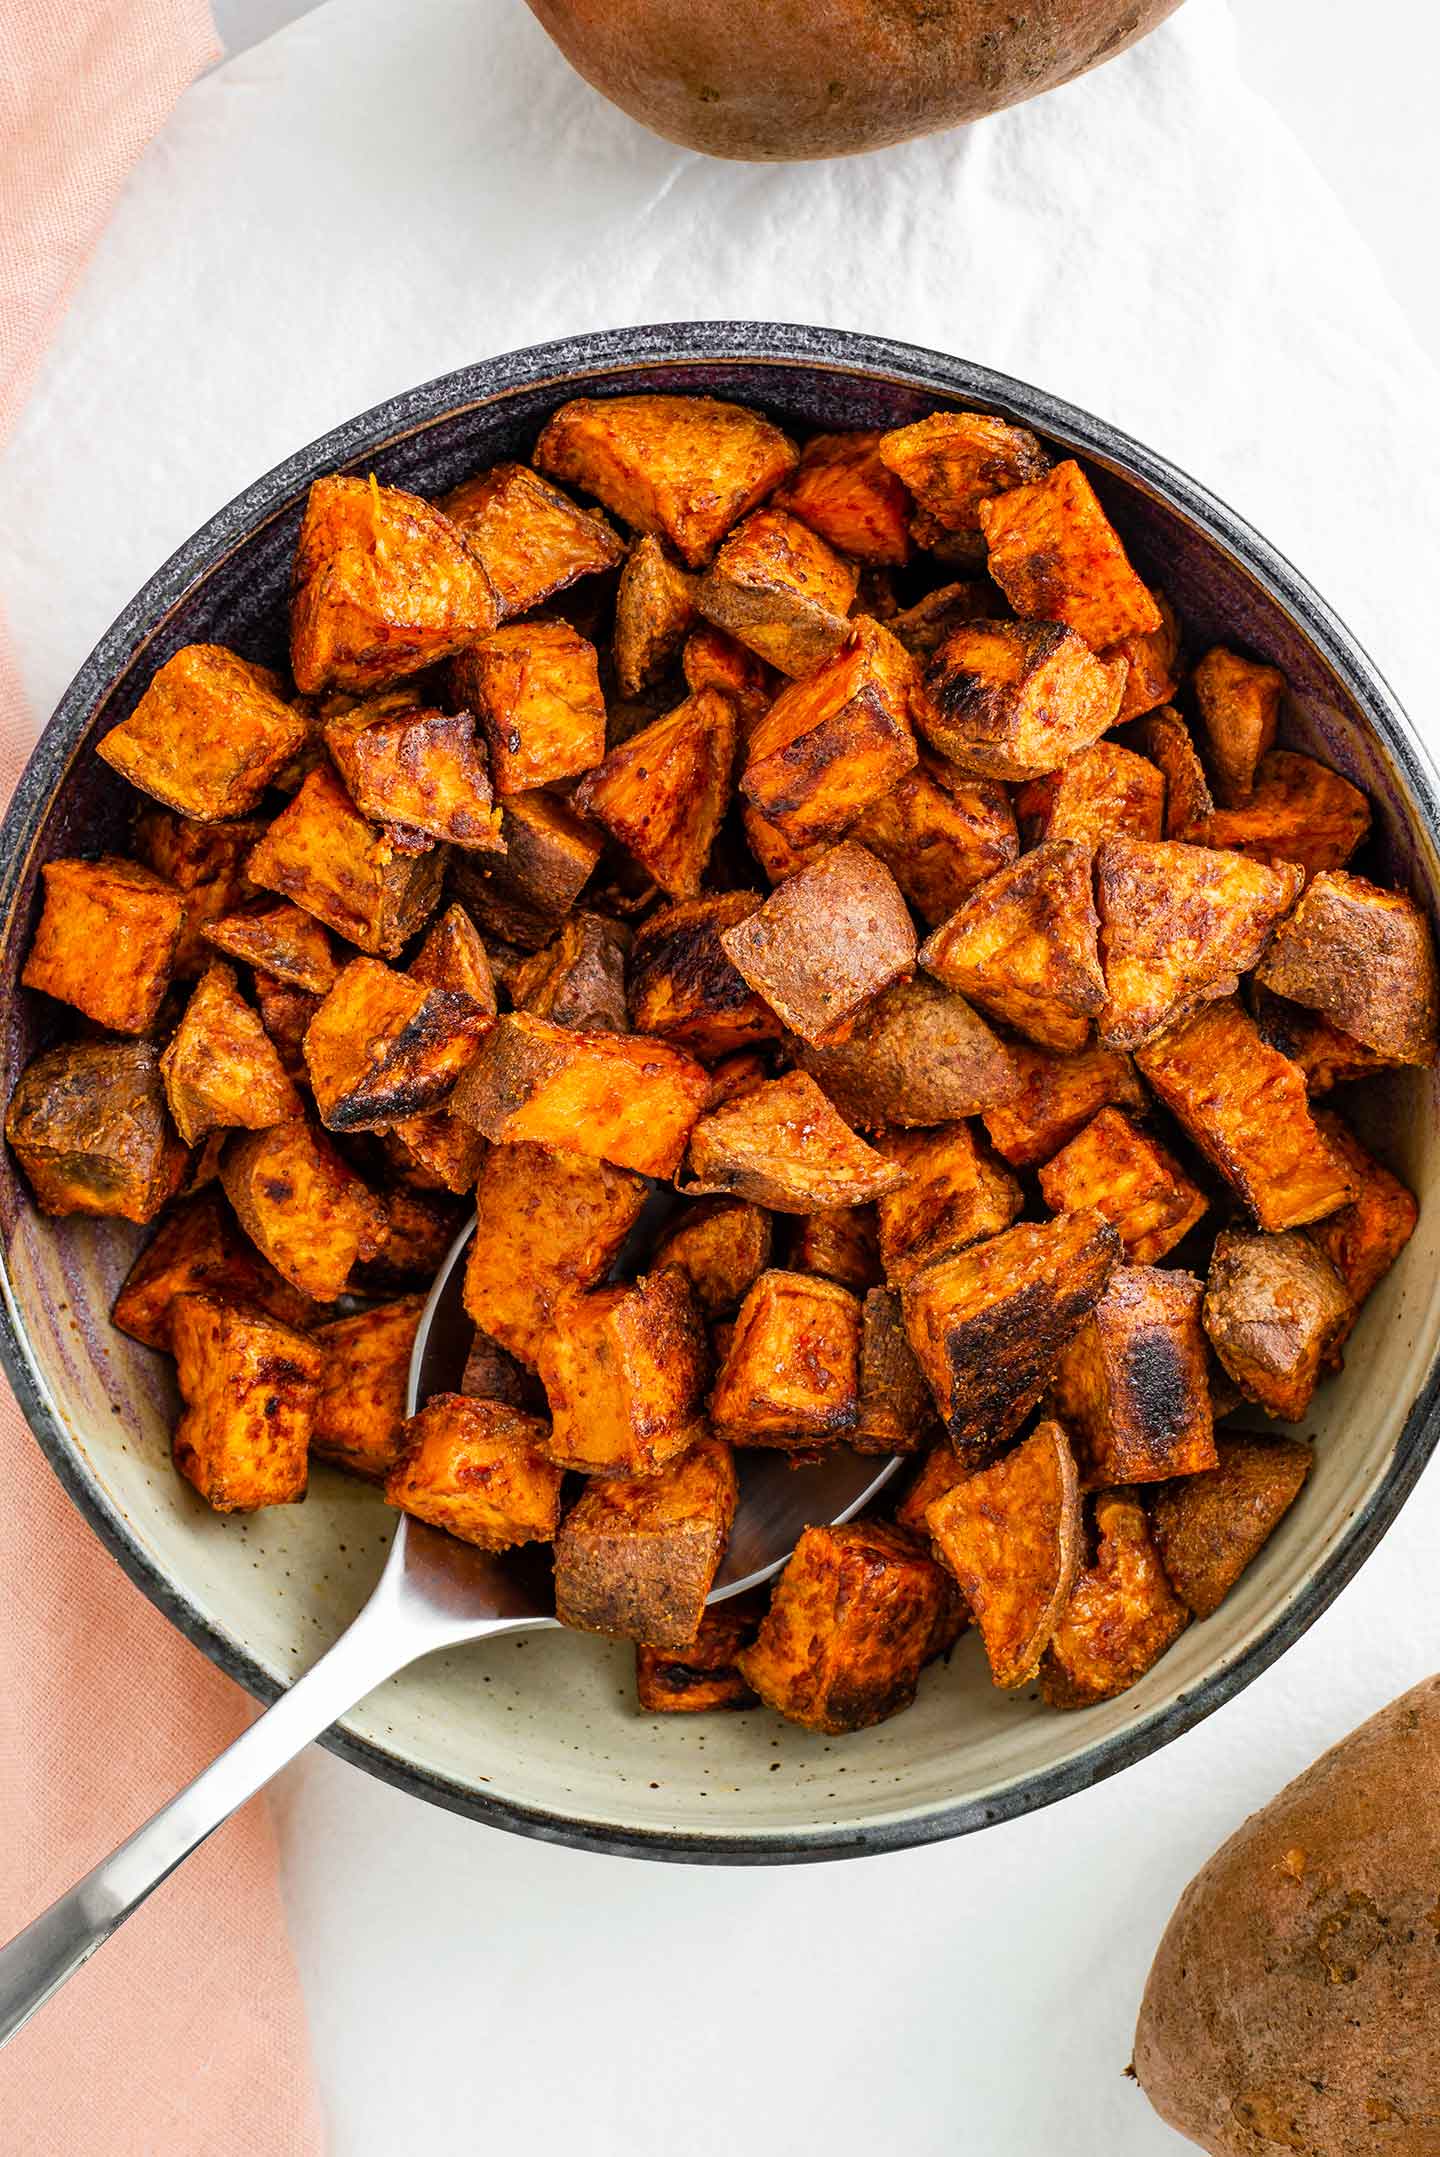 Top down view of crispy cubed sweet potato filling a shallow bowl with a serving spoon.